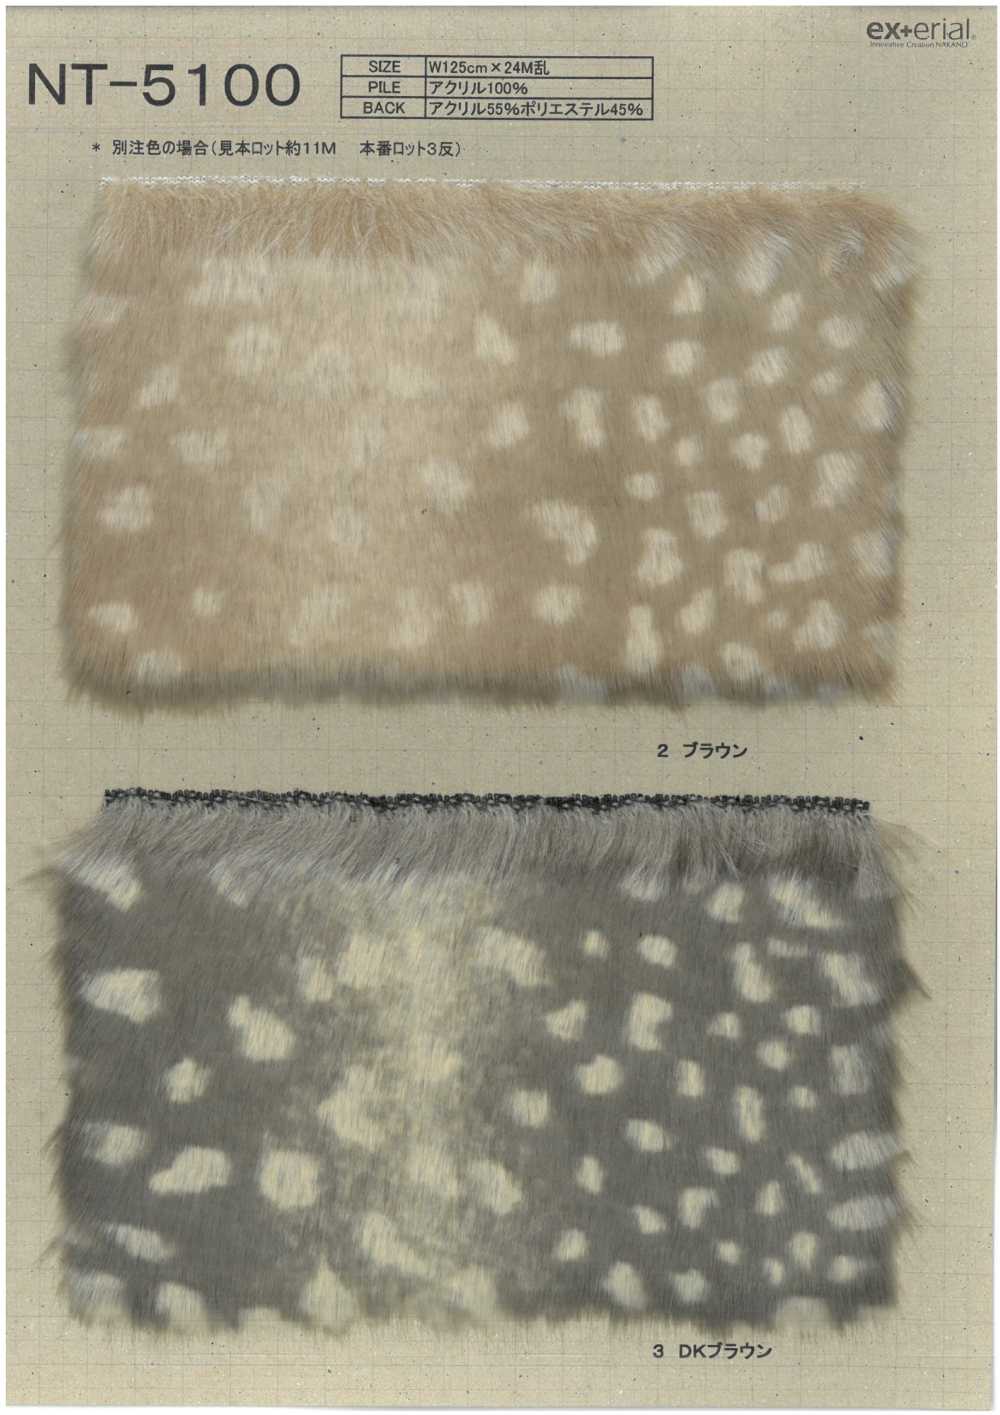 NT-5100 Craft Fur [Bambi][Textile / Fabric] Nakano Stockinette Industry